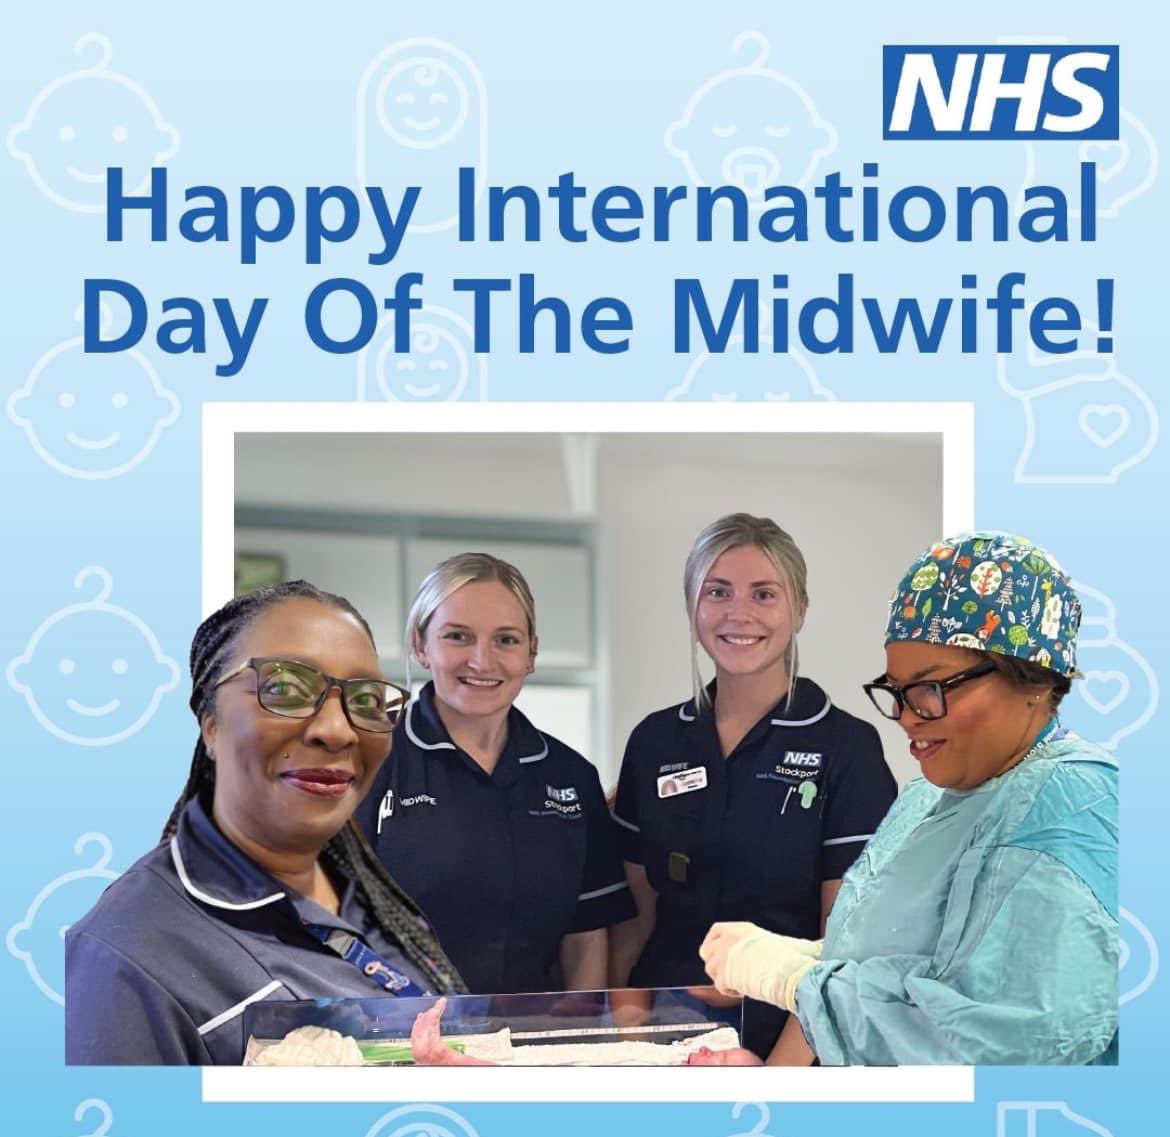 Happy International day of the midwives to all the wonderful midwives that’s just there at the start of life🥰 special shoutout to my @RoyalFreeNHS midwifery colleagues, you’re simply the best!we appreciate you all😊👏🏽❤️TY @DavidCo43958983 @ColletteSpenc15 Ruth